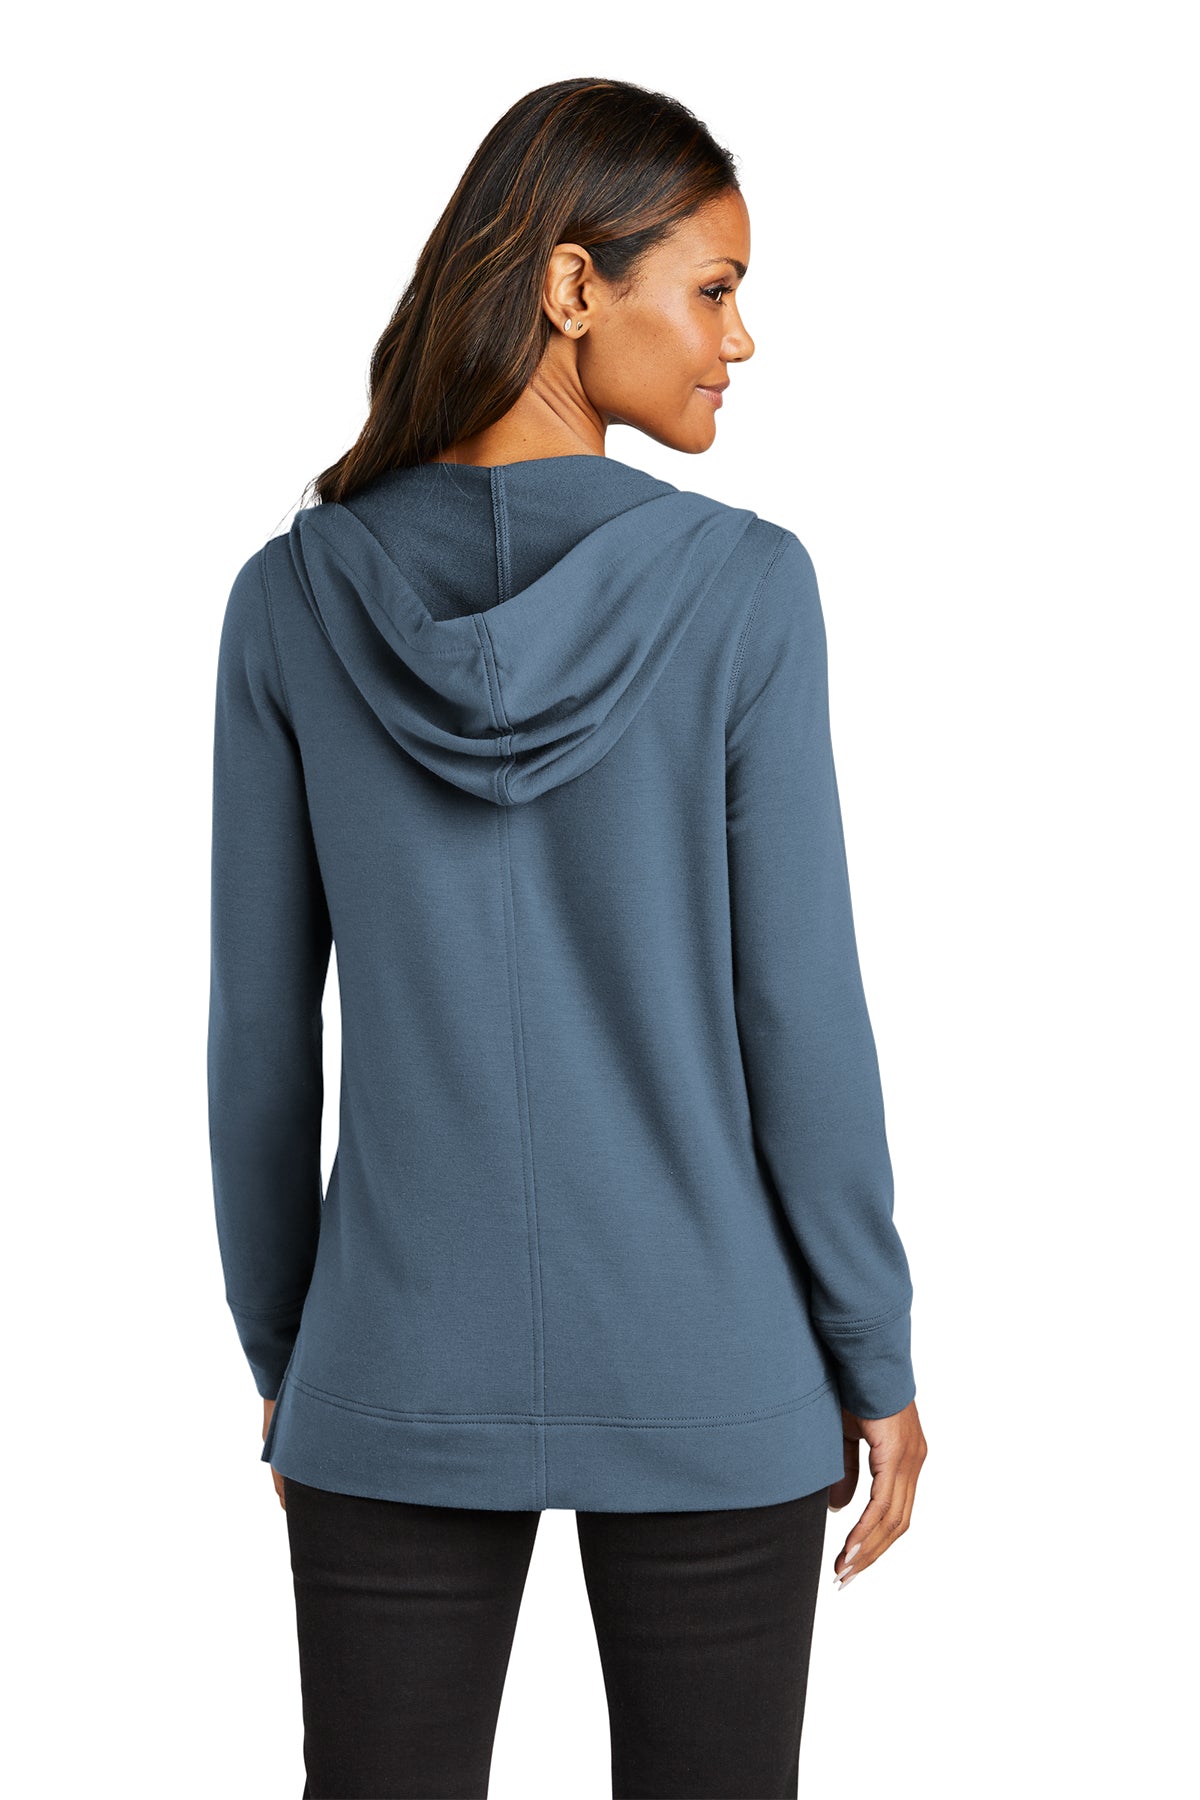 Sidney Microterry Pullover Hoodie - Dusk Blue (Ships in 1-2 Weeks)